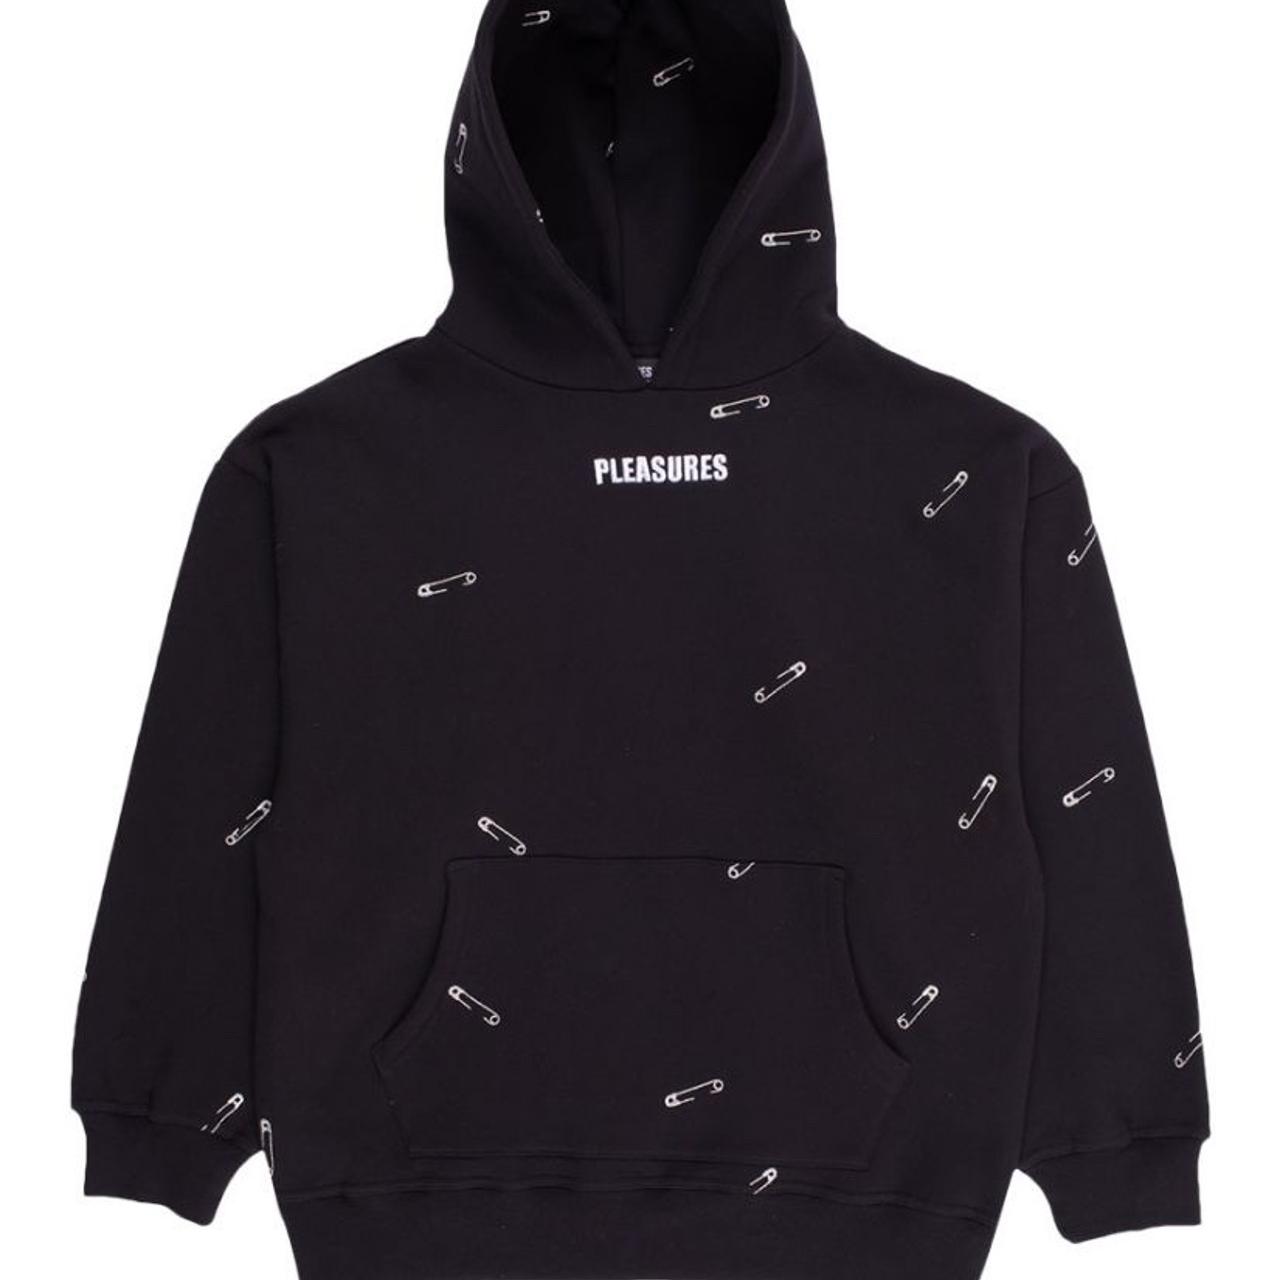 PLEASURES Safety Pin Embroidered Hoodie, Size M...